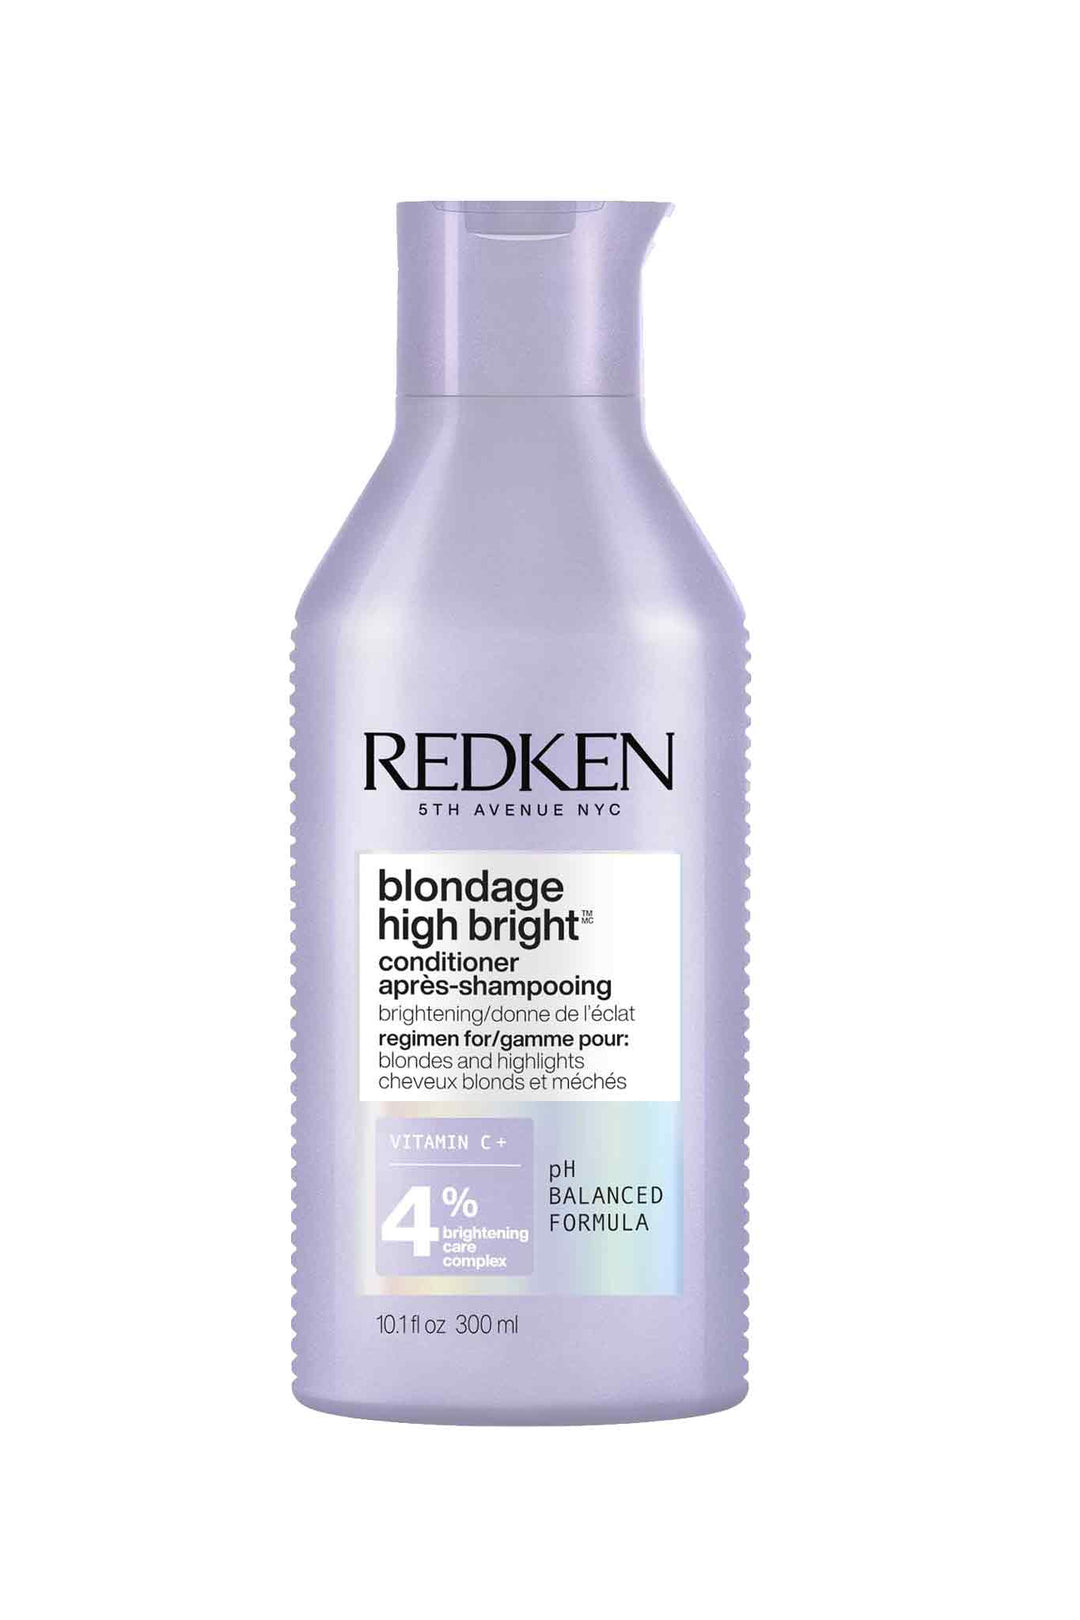 Blonde hair that loses its brightness between visits to the salon? Redken's got you covered. This moisturising and brightening conditioner will ensure your locks are luscious and vibrant. 